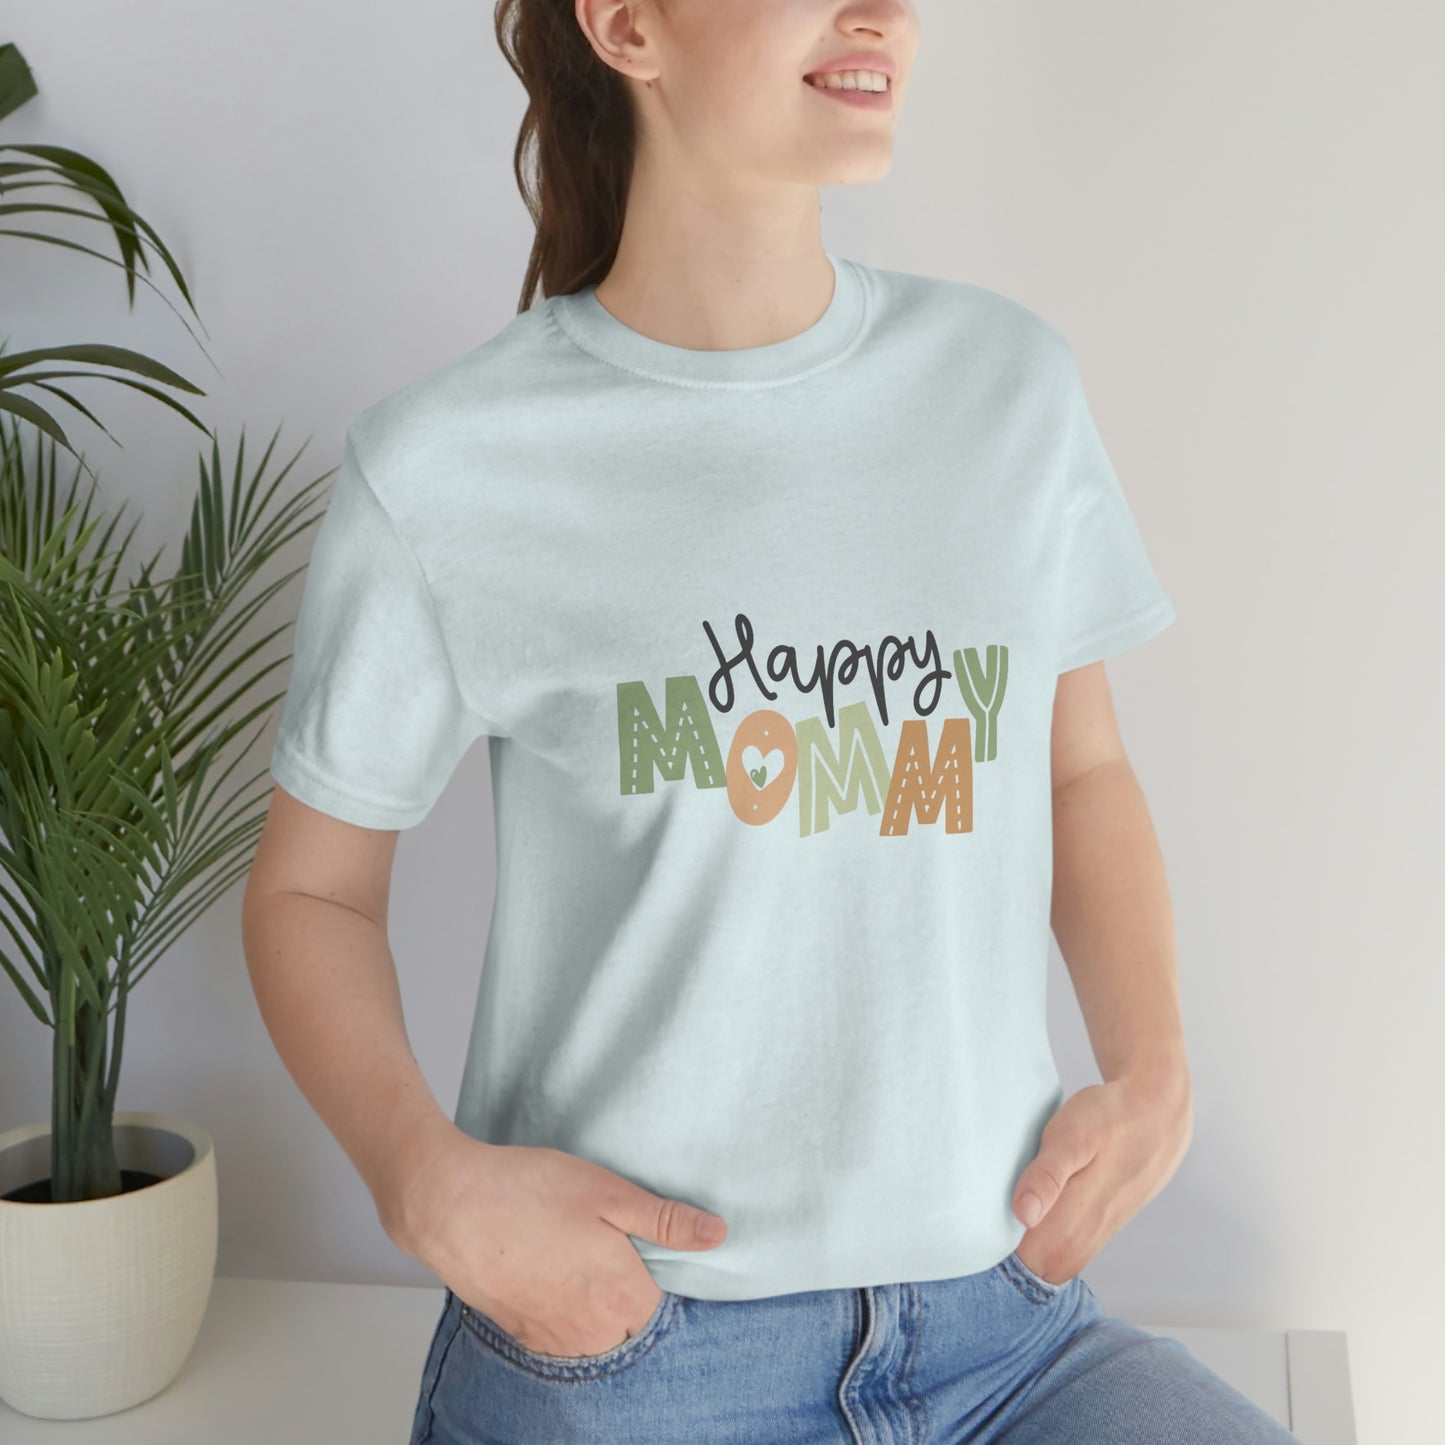 Show your mom you care with the Happy Mommy ice blue T-shirt! The perfect gift for mom!